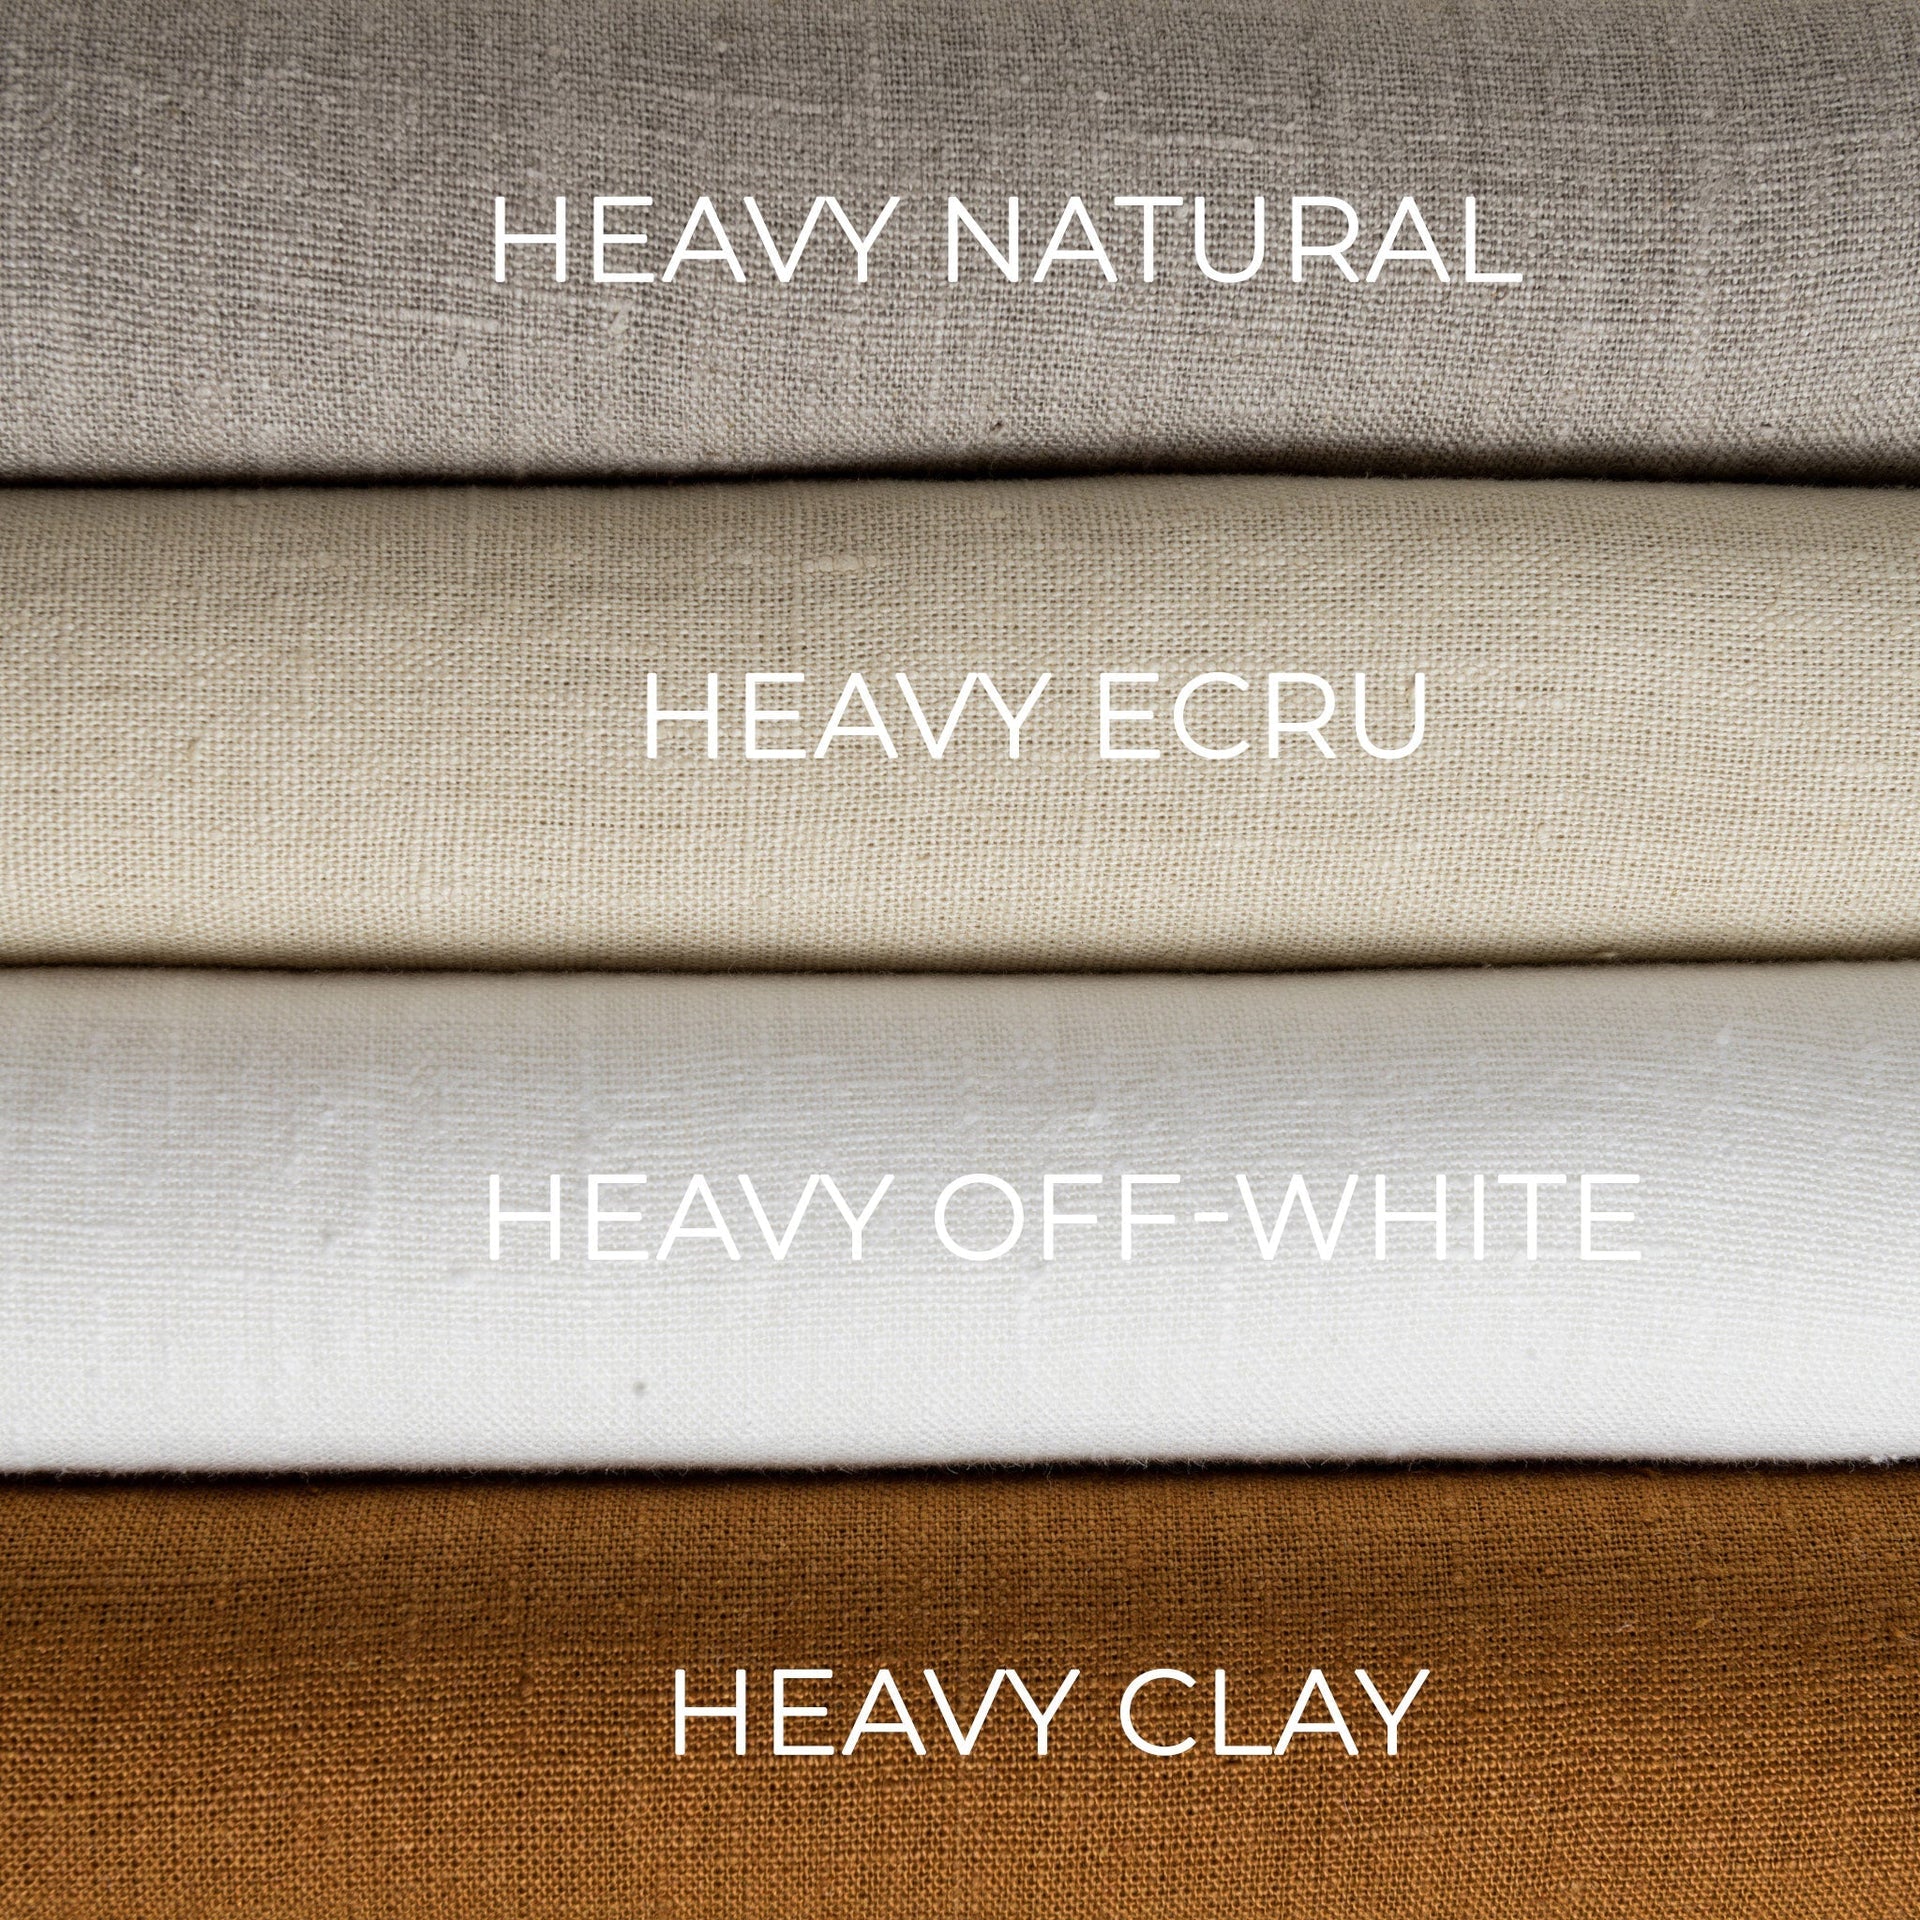 @Color: Heavy Weight Natural, Color: Heavy Weight Ecru, Color: Heavy Weight Off-White, Color: Heavy Weight Clay;